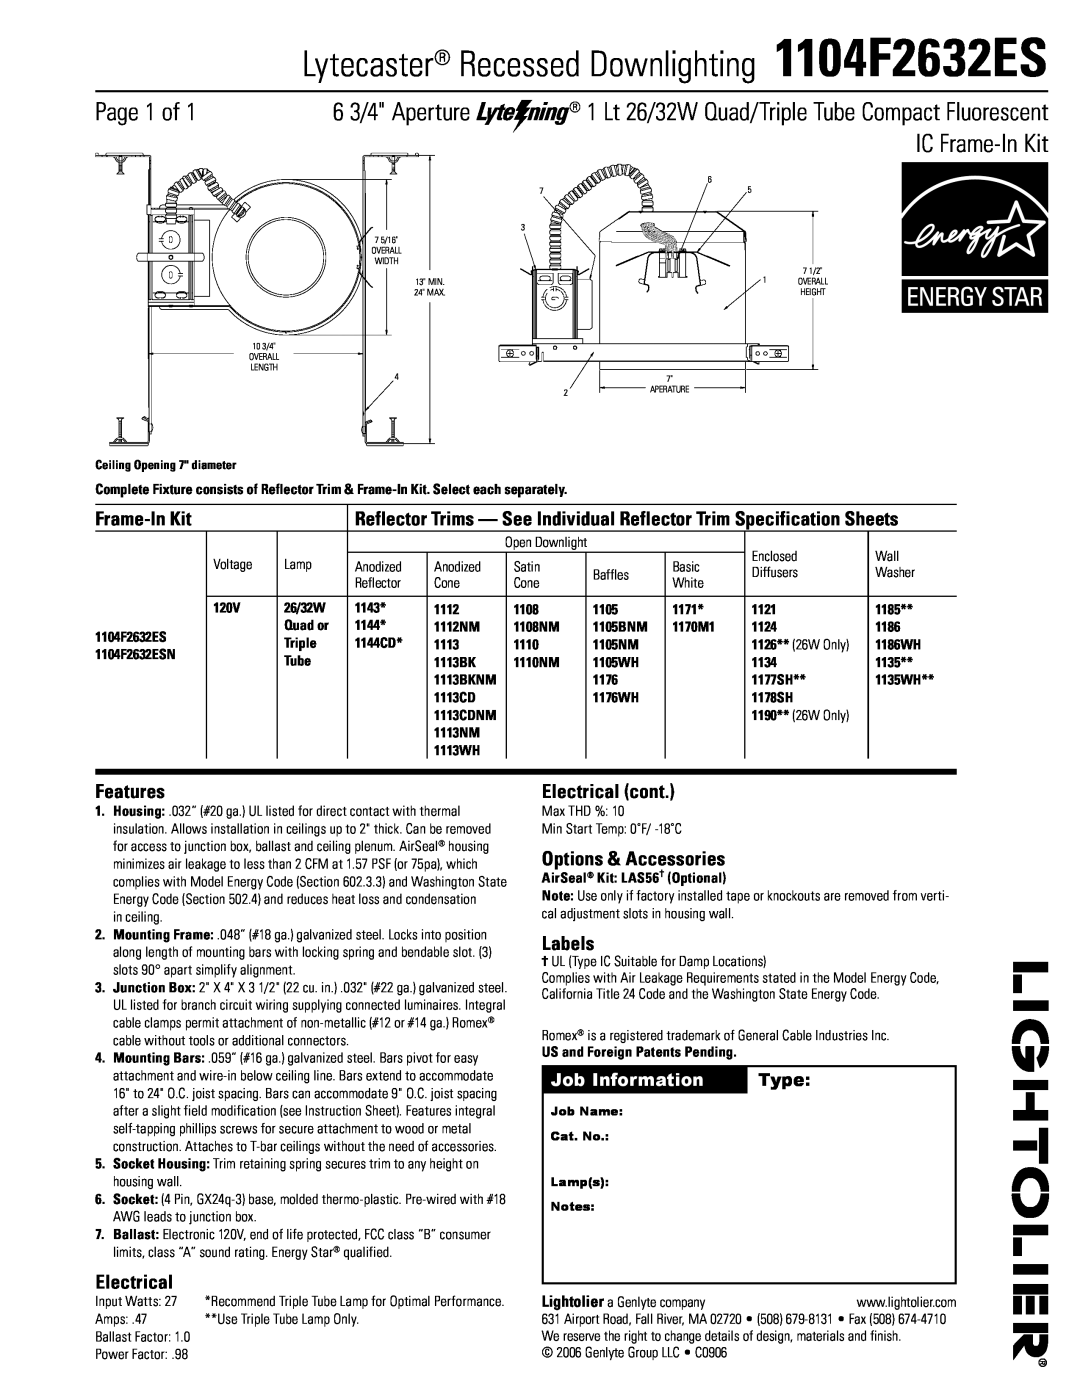 Lightolier specifications Lytecaster Recessed Downlighting 1104F2632ES, Page  of, IC Frame-InKit, Features, Electrical 